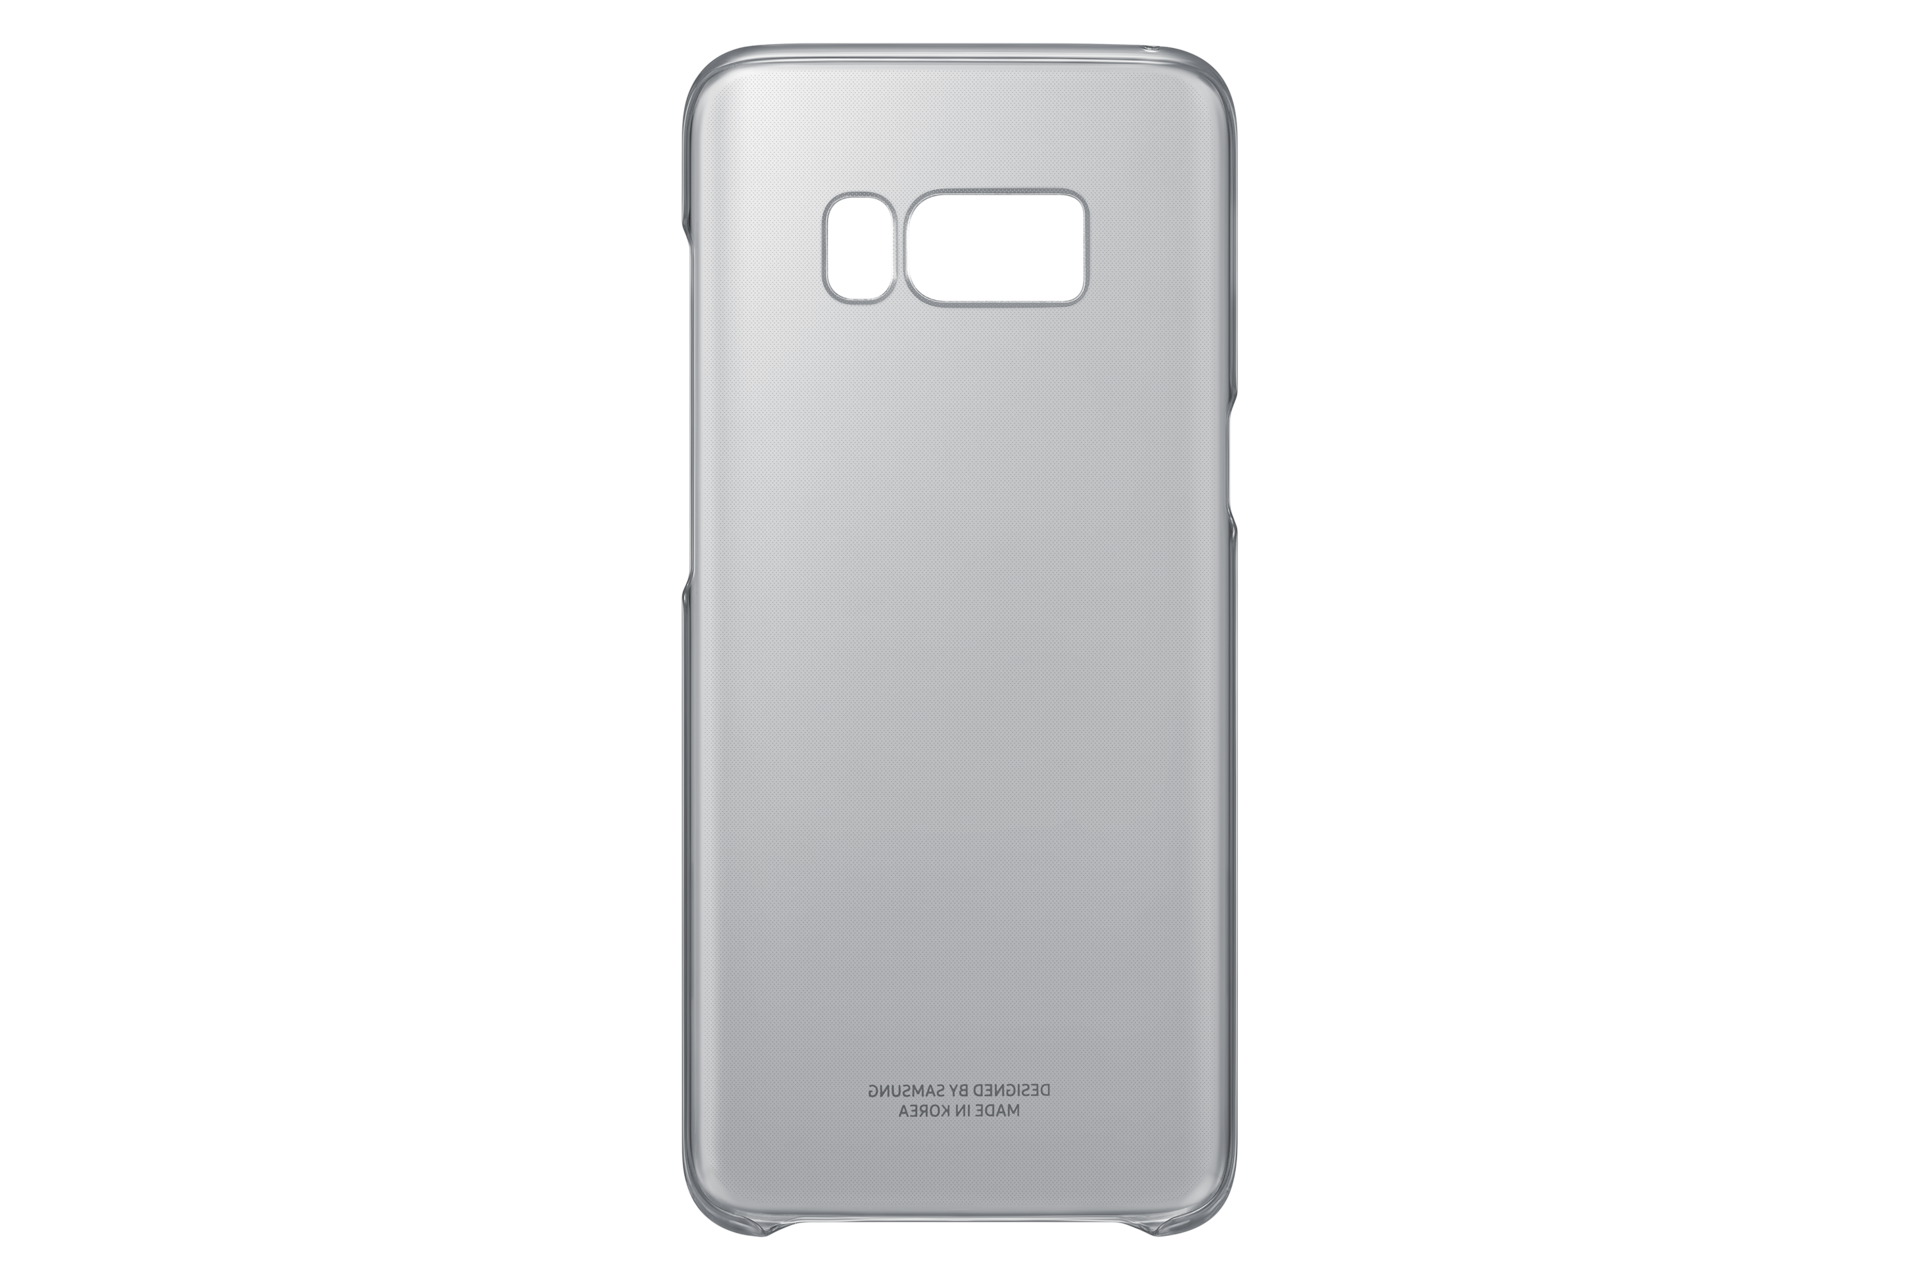 http://images.samsung.com/is/image/samsung/fr-clear-cover-galaxy-s8-ef-qg950cbegww-frontblack-61723859?$PD_GALLERY_JPG$